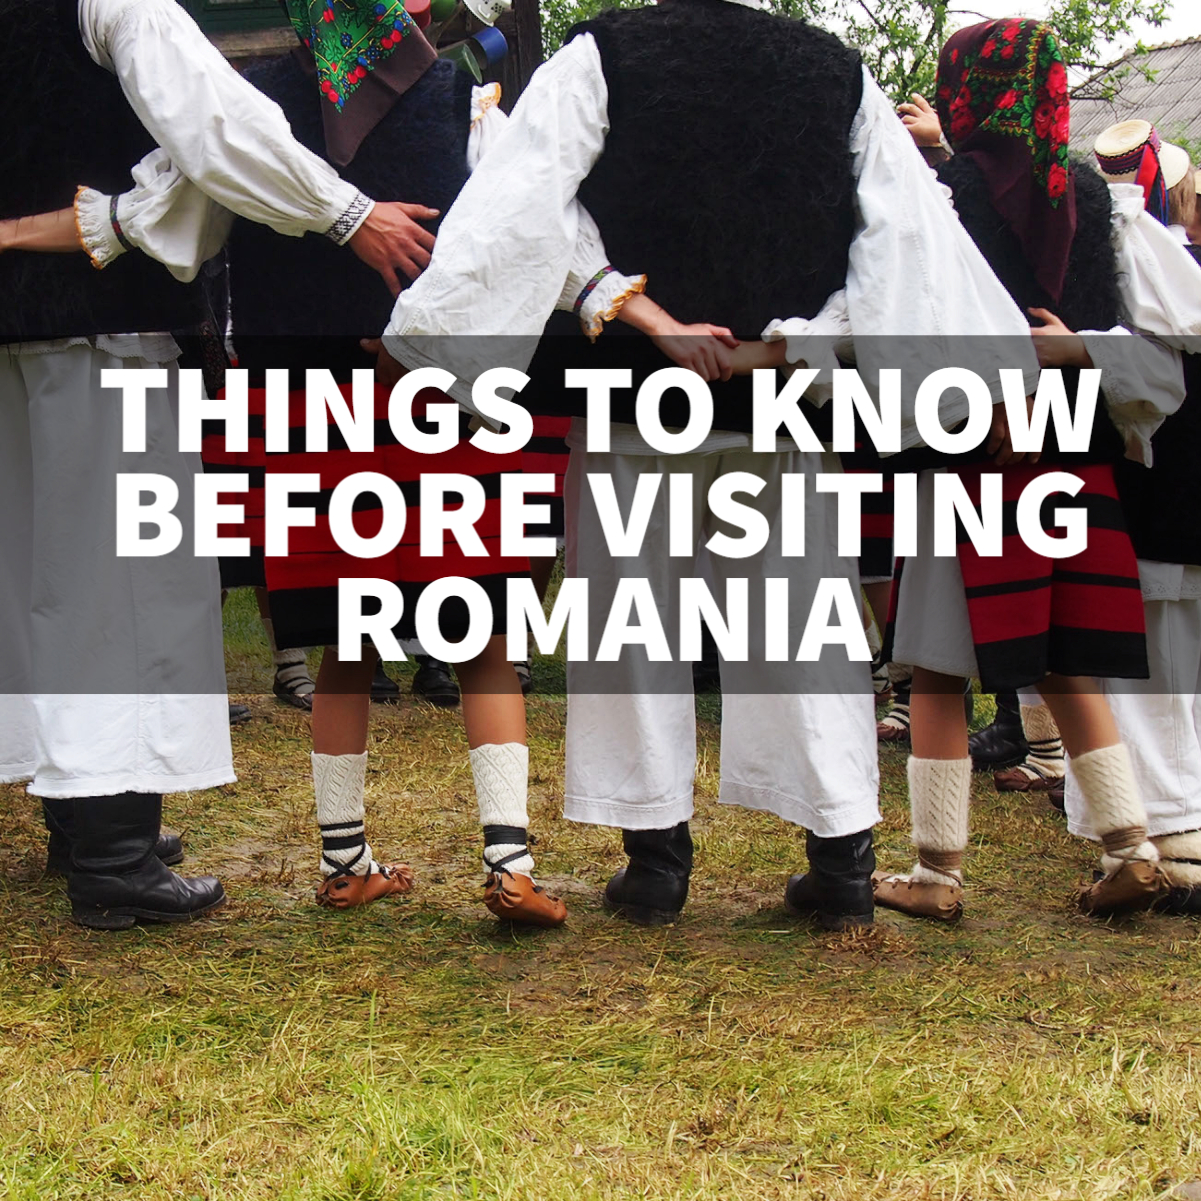 Things to know before going to Romania holiday or vacation